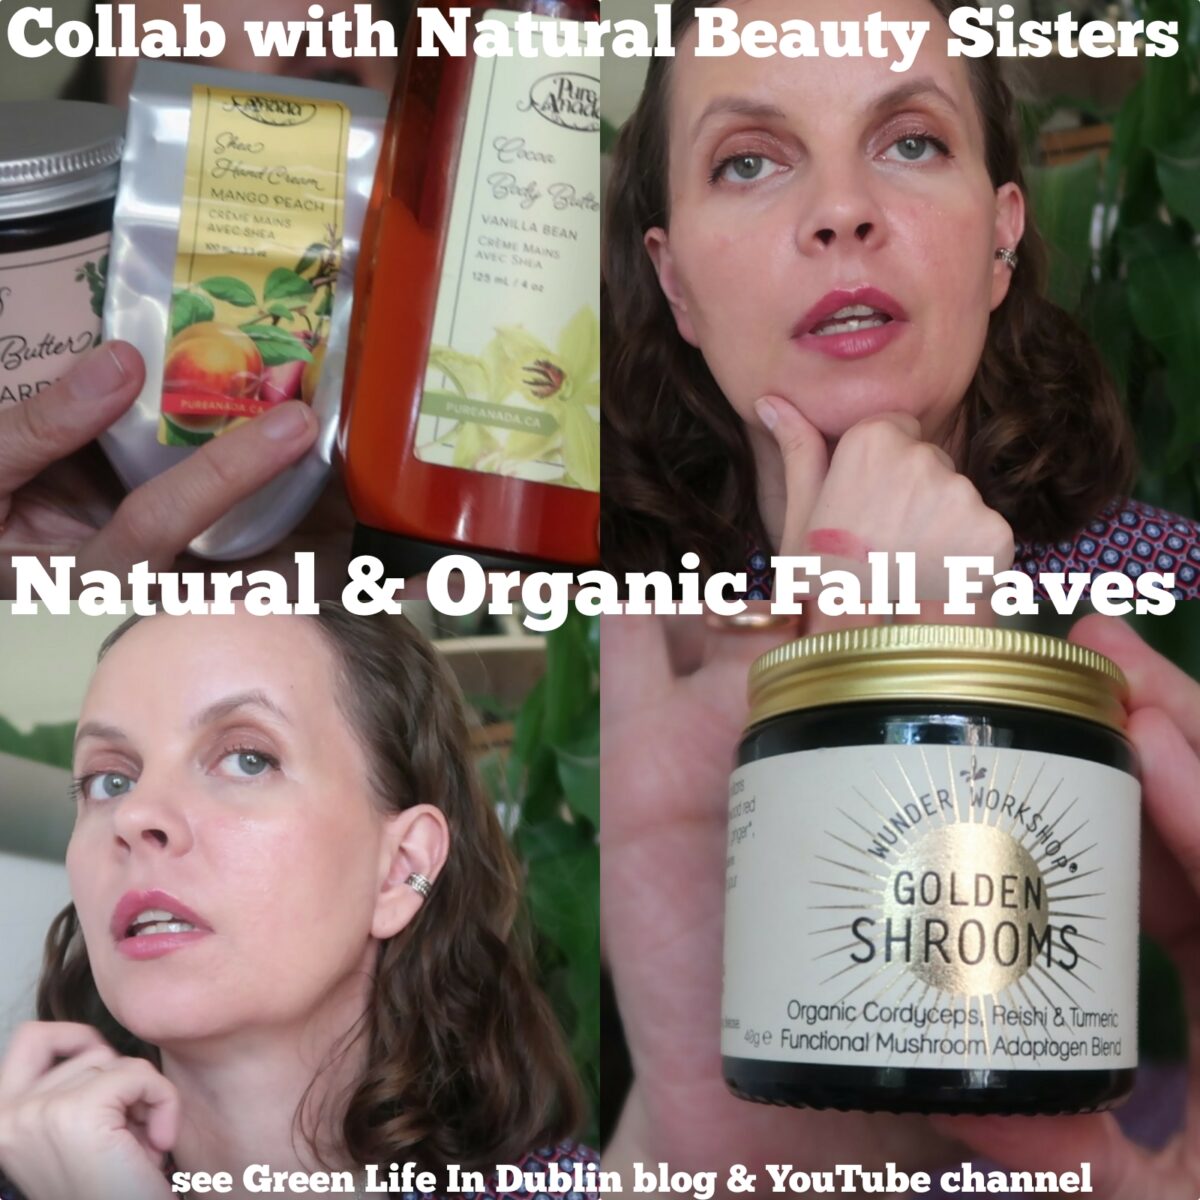 Natural & Organic Fall 2020 Faves – Collab with The Natural Beauty Sisters